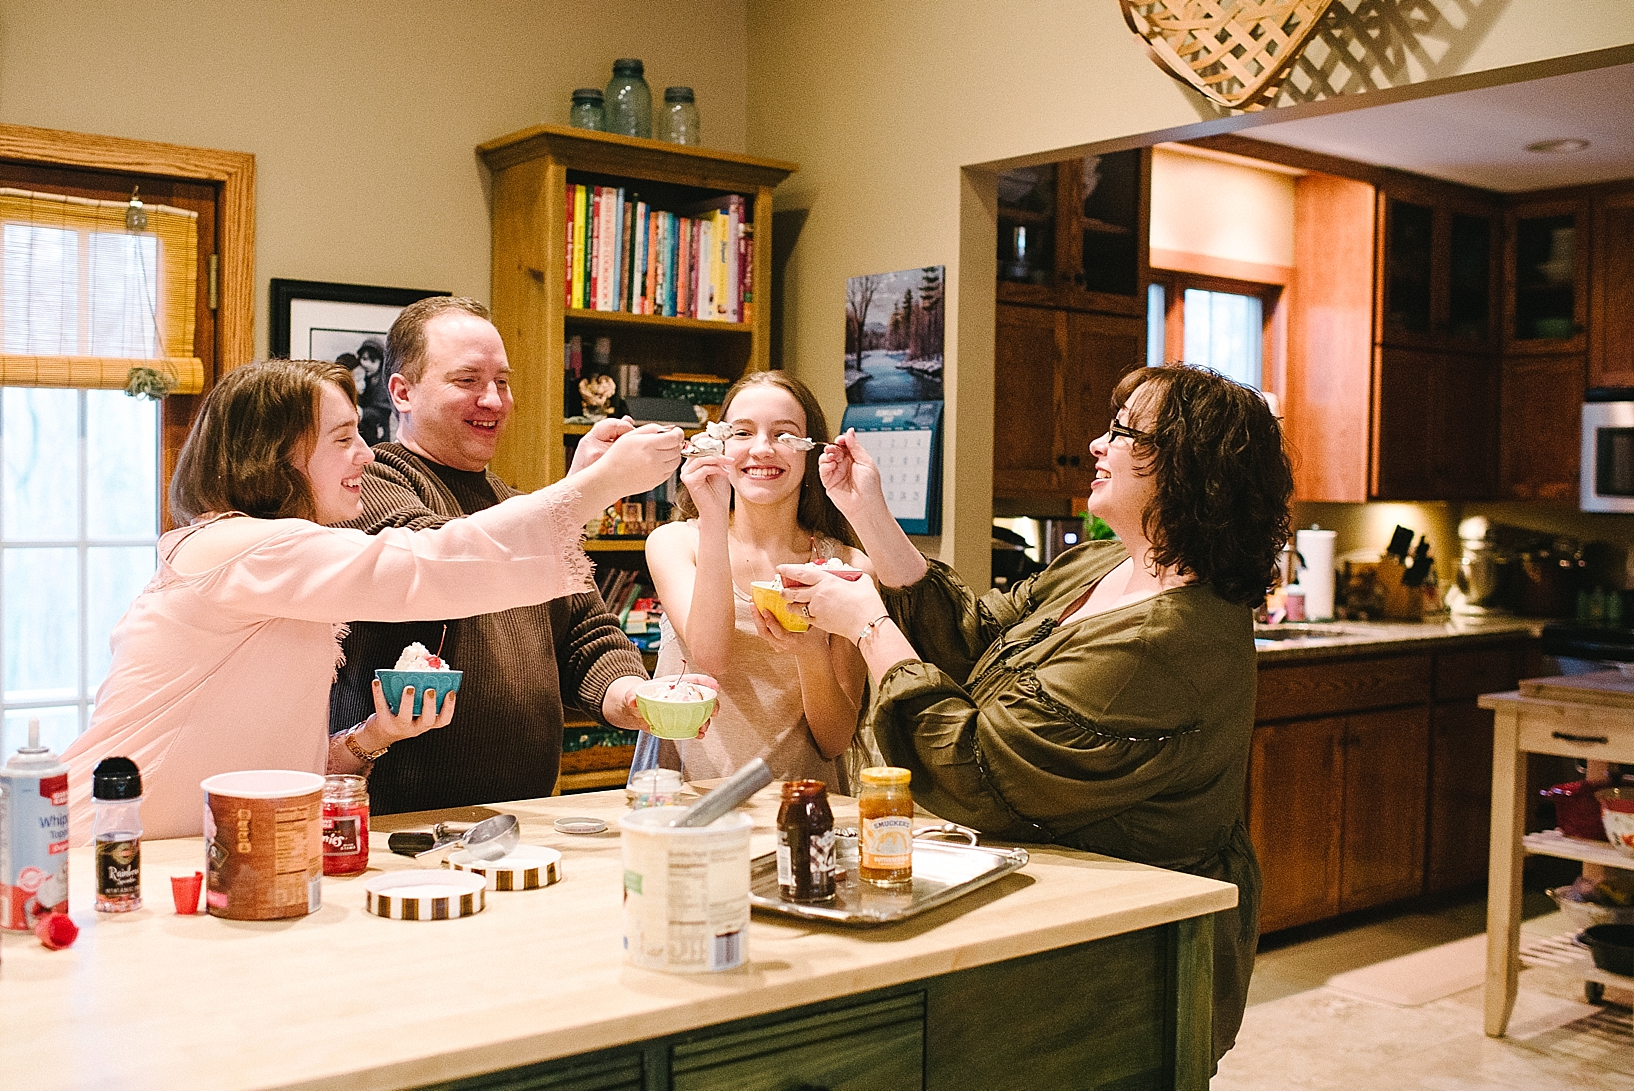 family clinking spoons together while eating ice cream sundaes in kitchen